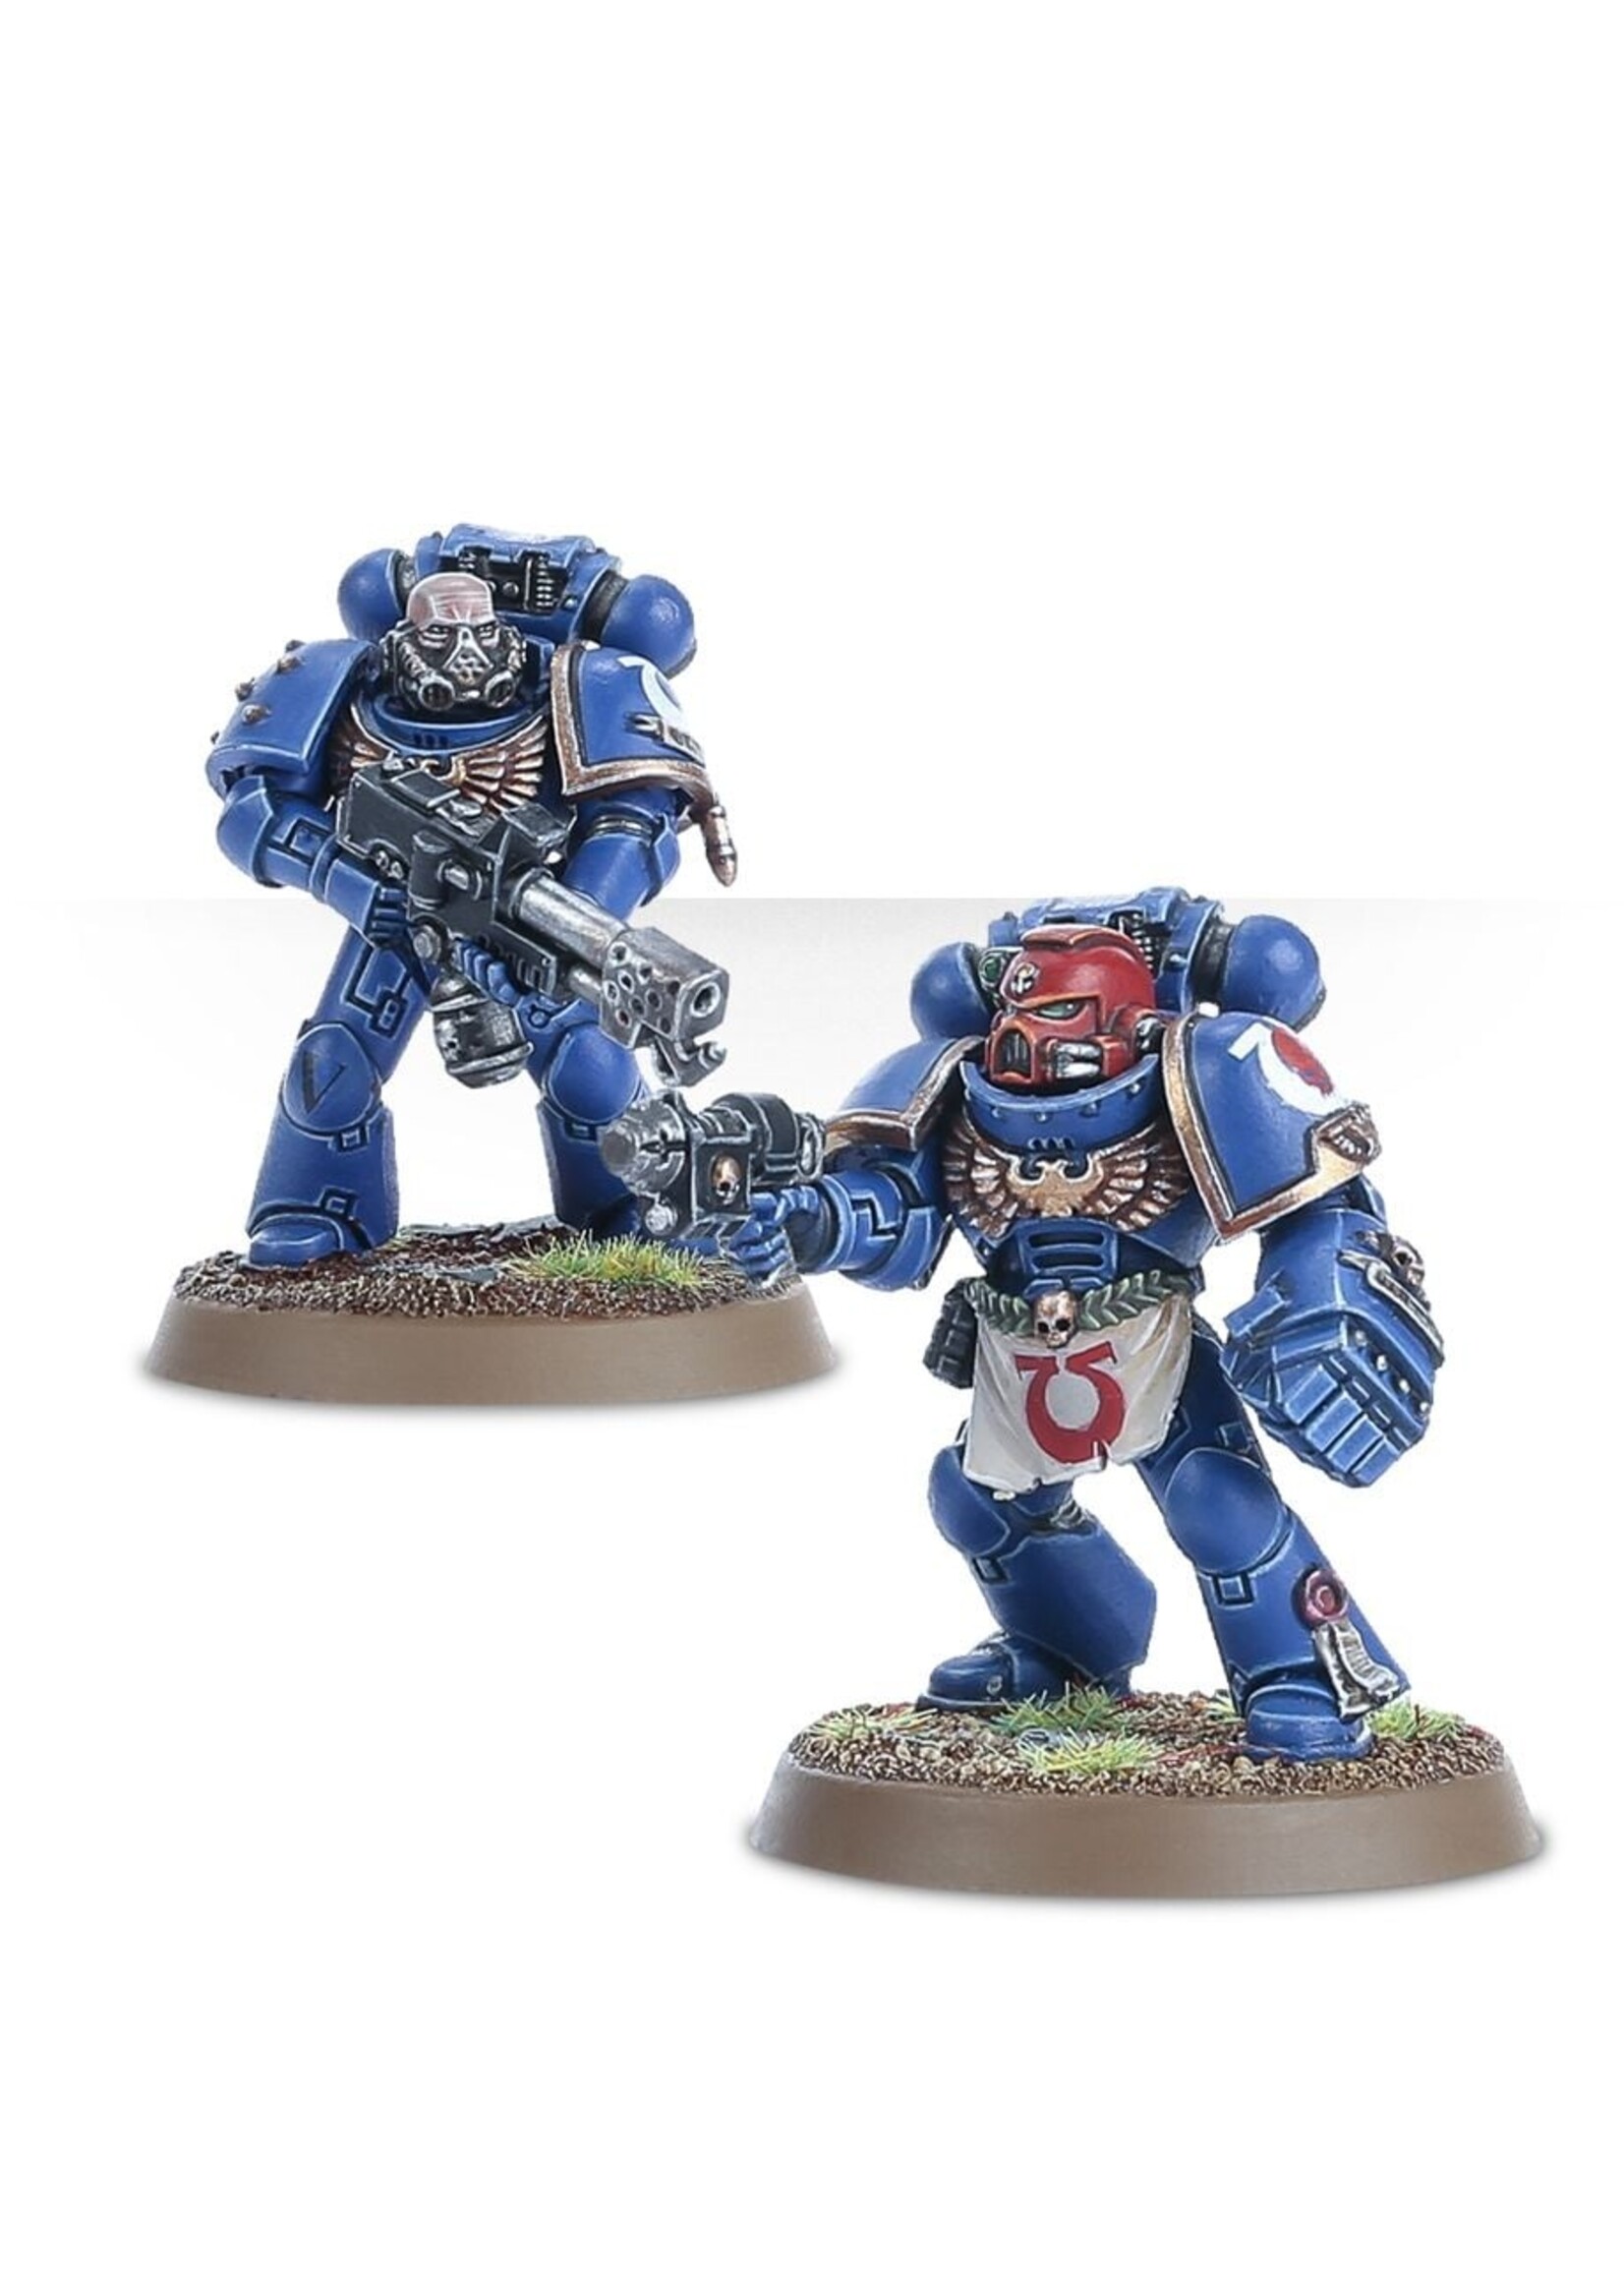 Games Workshop Space Marines: Tactical Squad